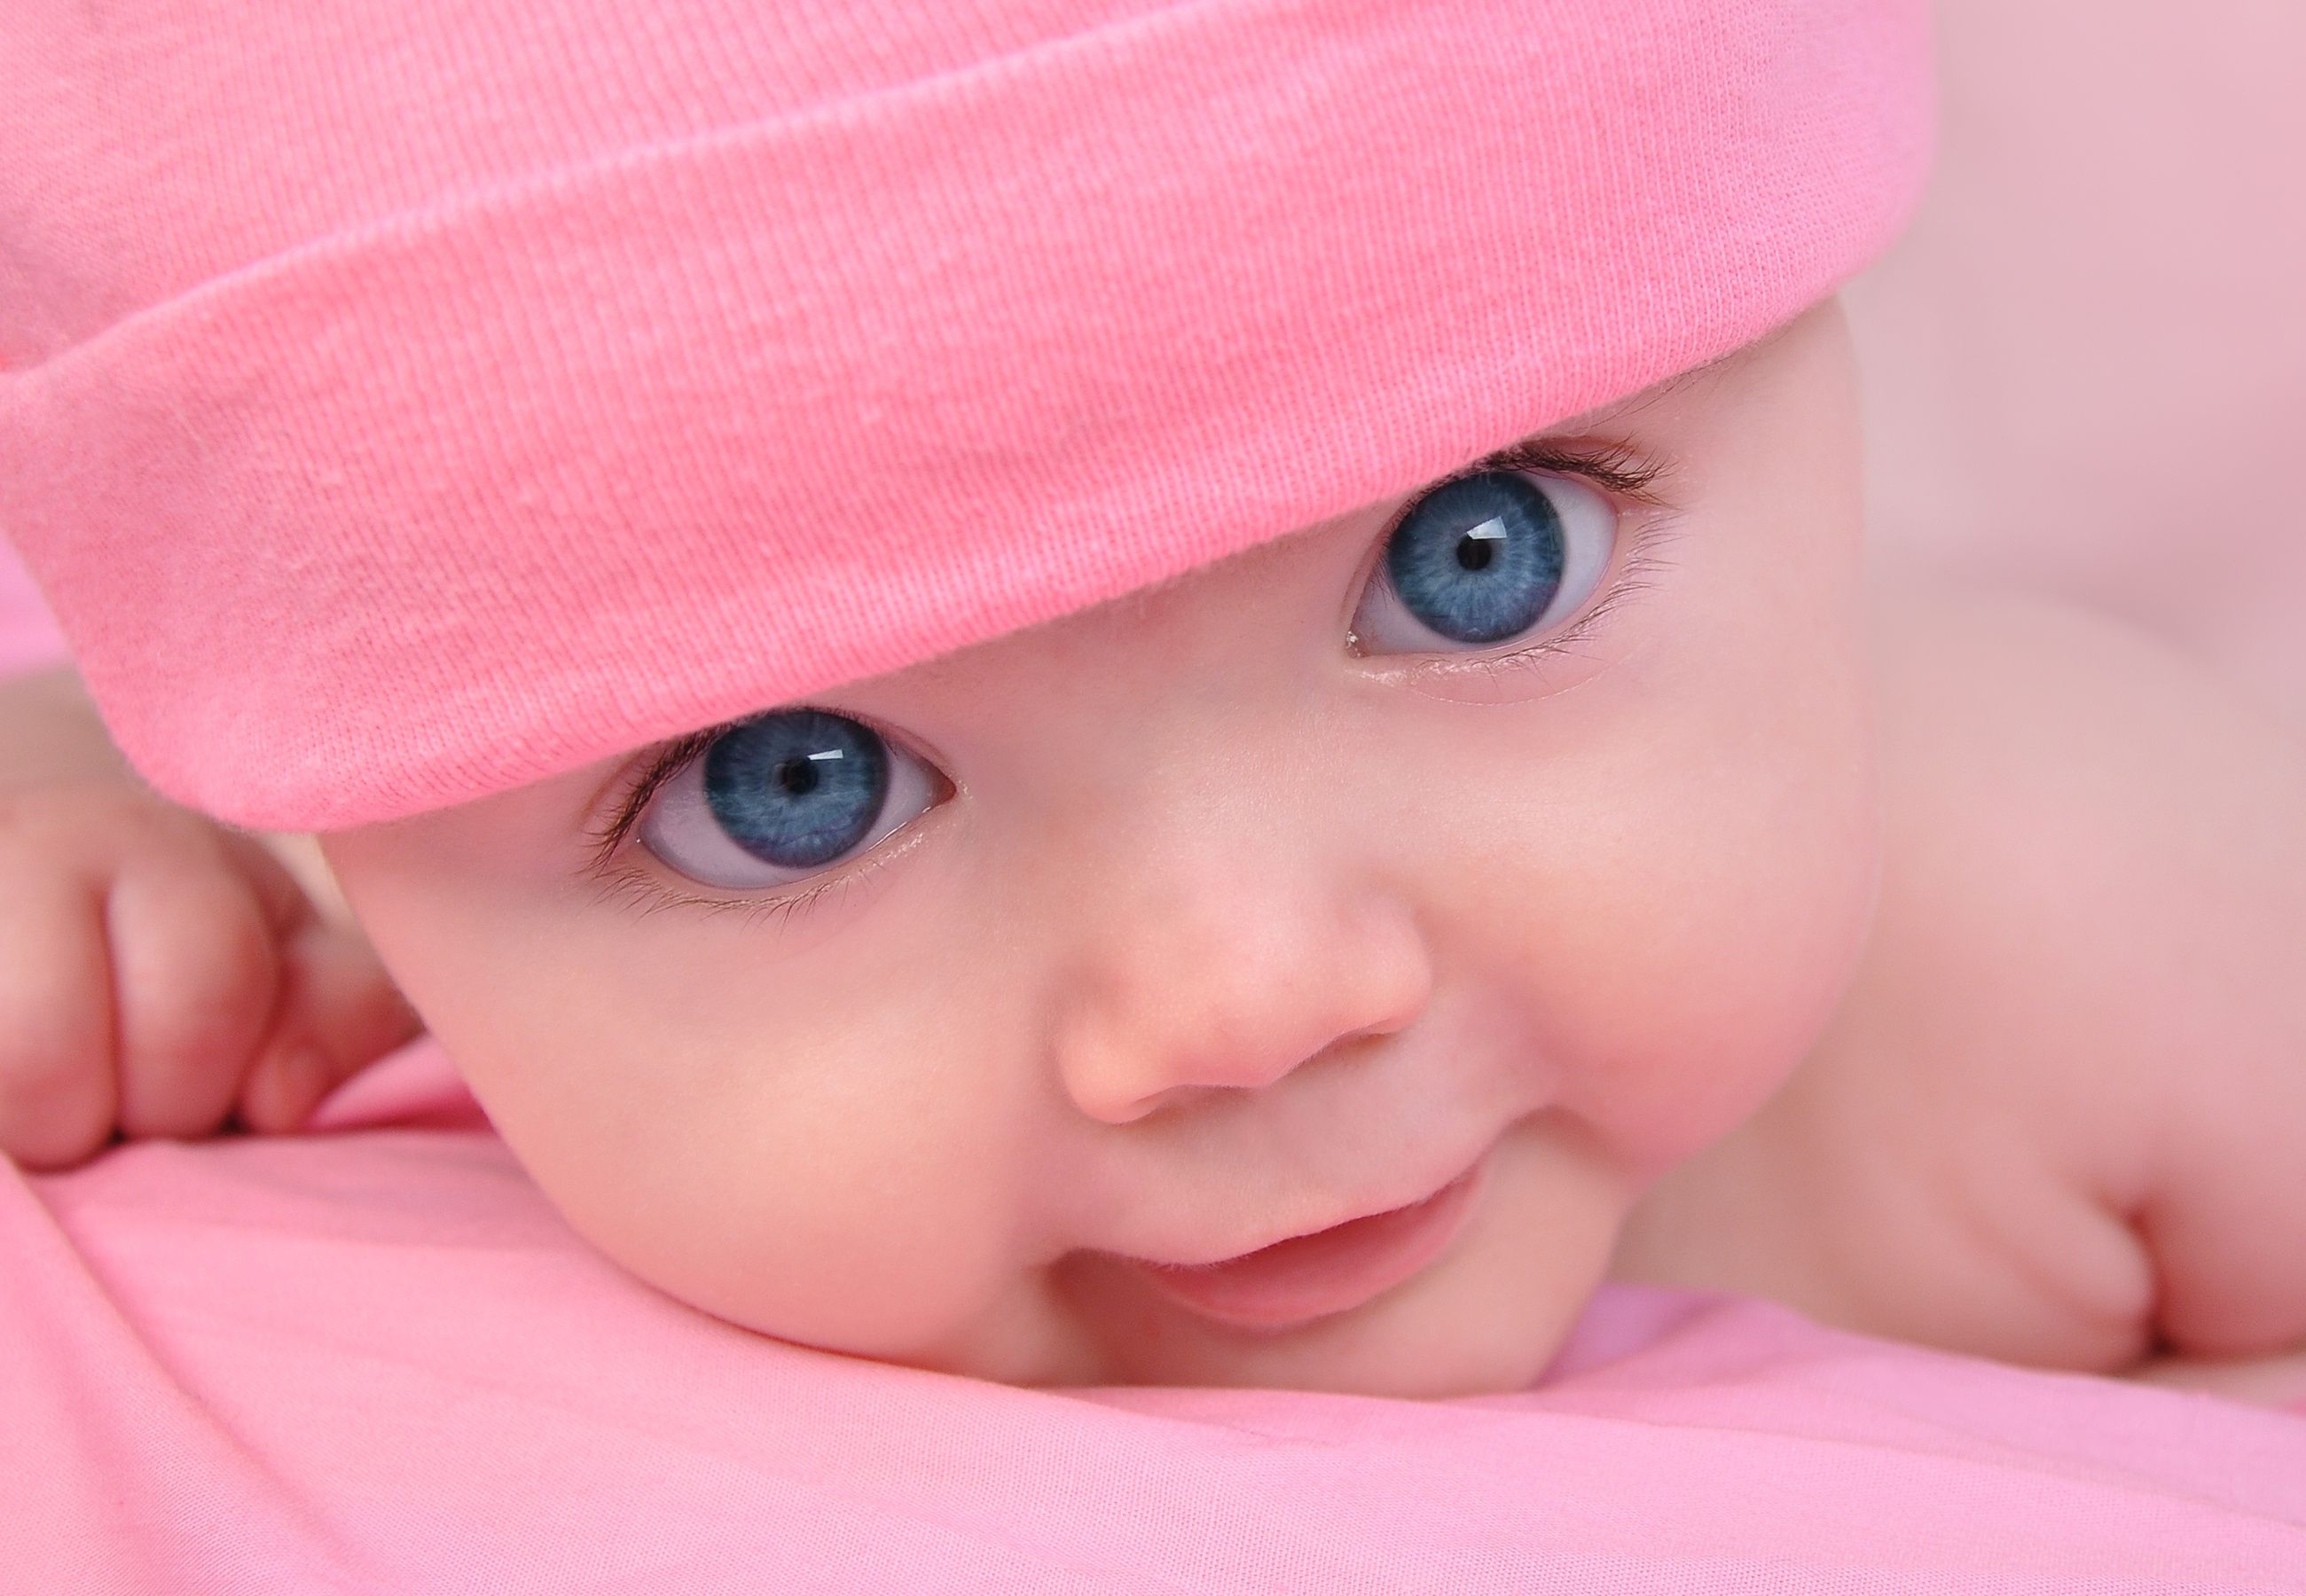 Cute Pictures Download - Beautiful Blue Eyes Baby - HD Wallpaper 